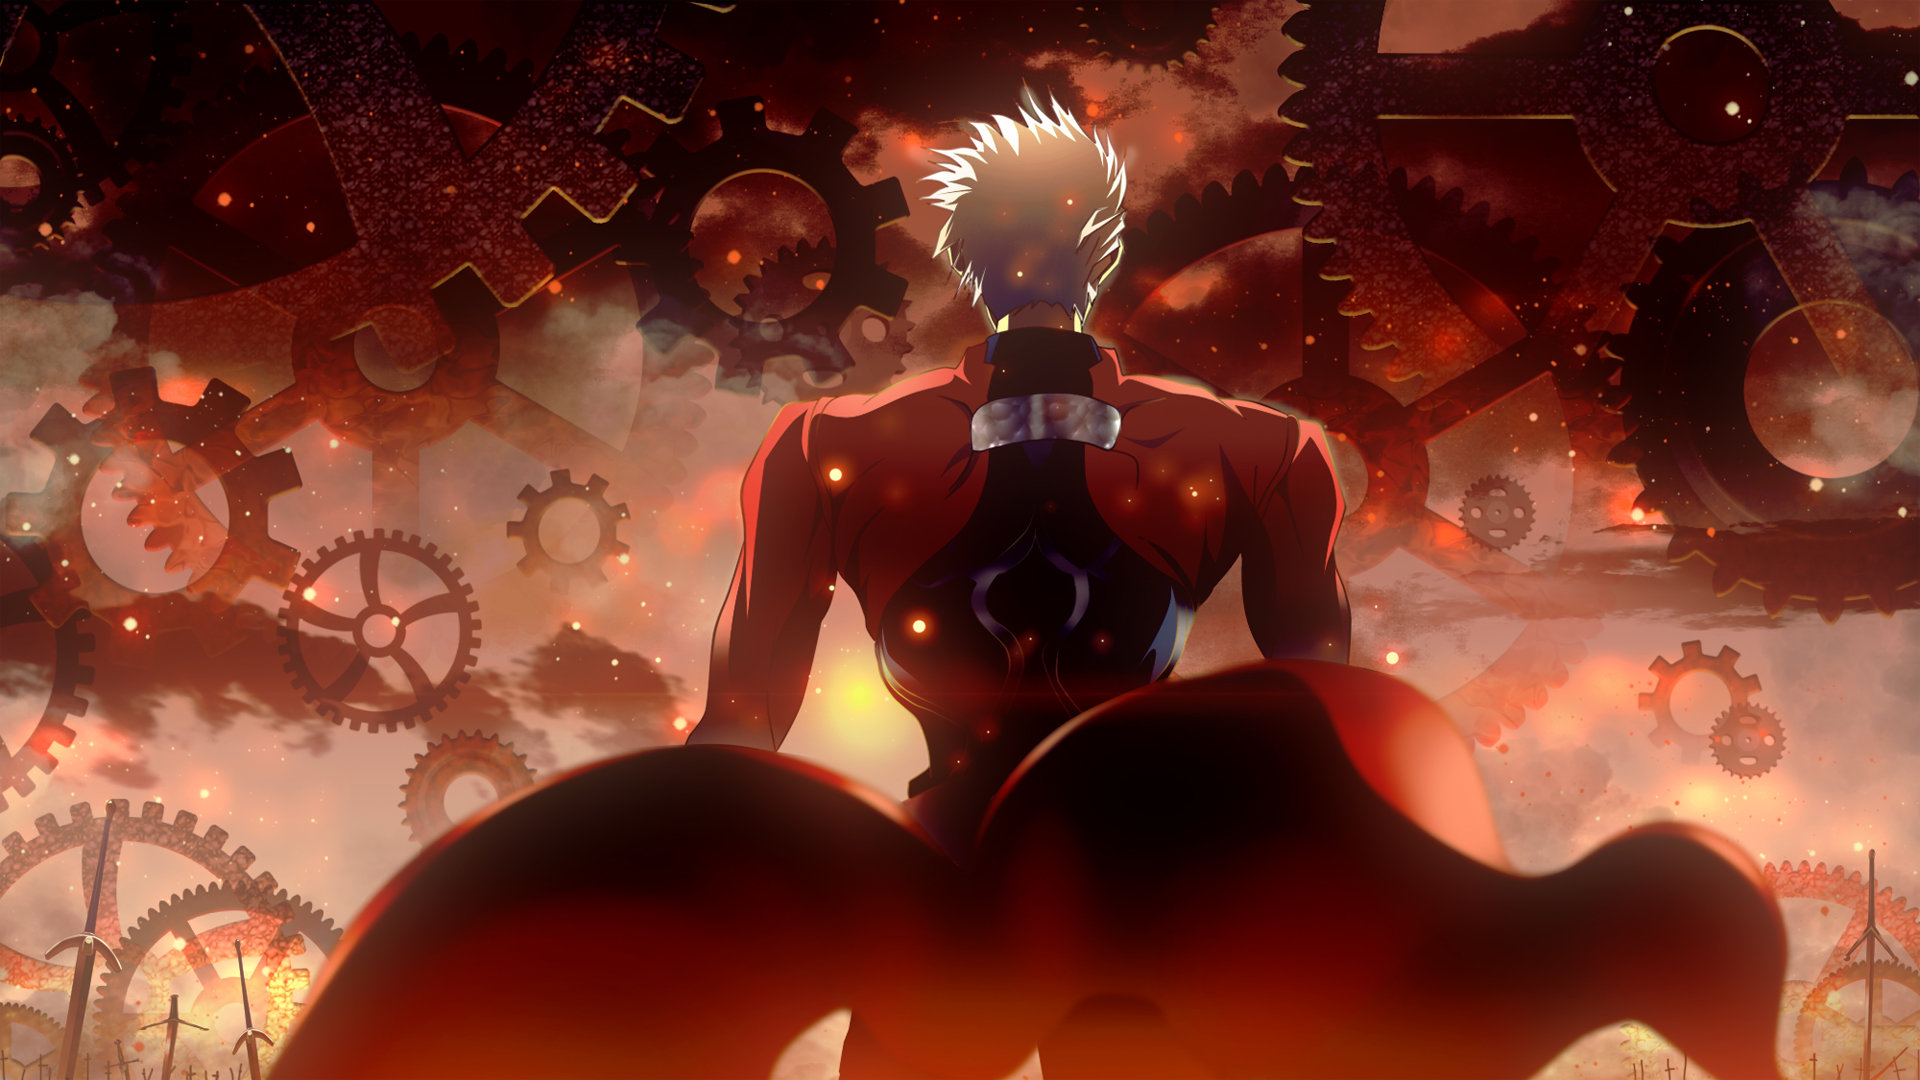 Best Fate/Stay Night: Unlimited Blade Works wallpaper ID:291049 for High Resolution full hd computer